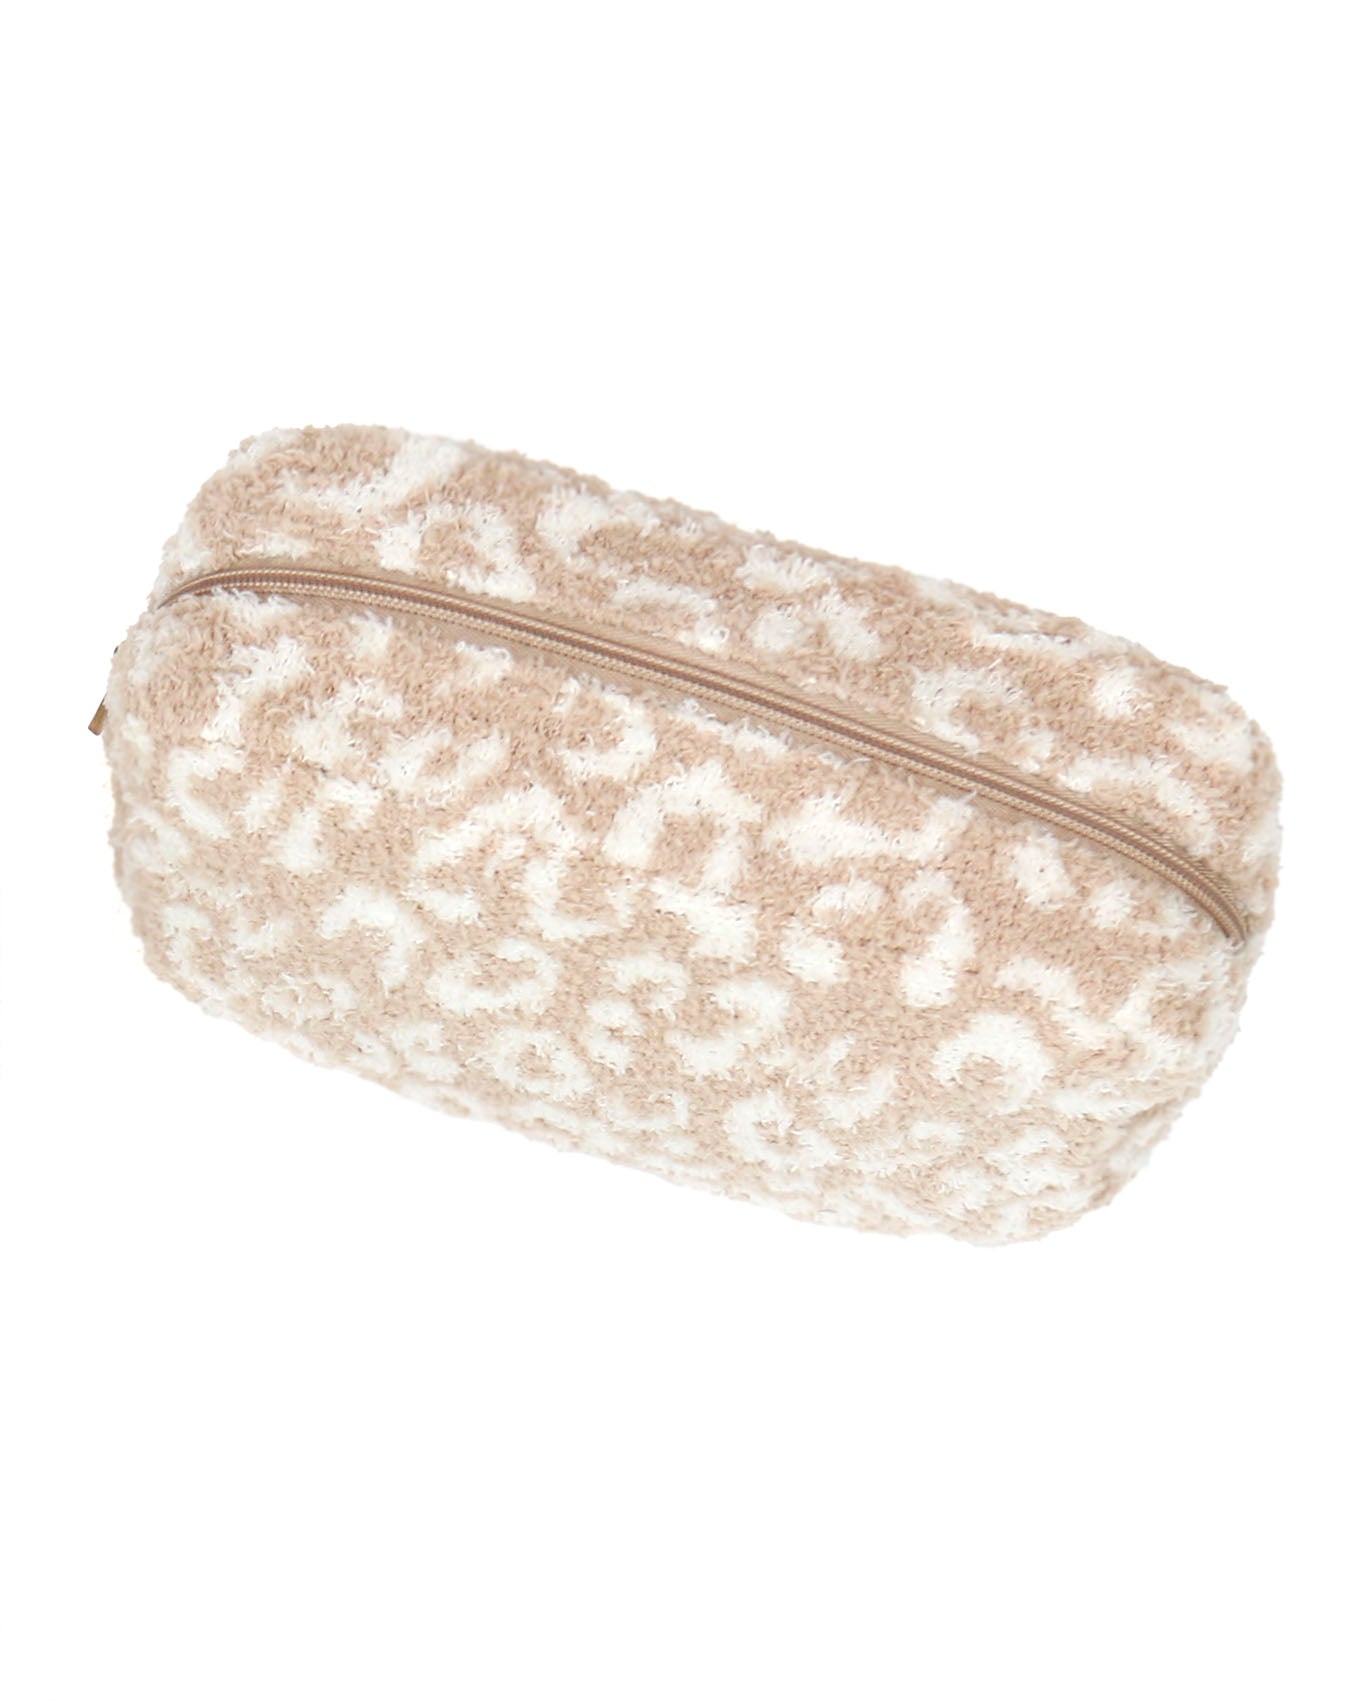 Top view of Make Up pouch in Cozy Essentials Gifting Kit